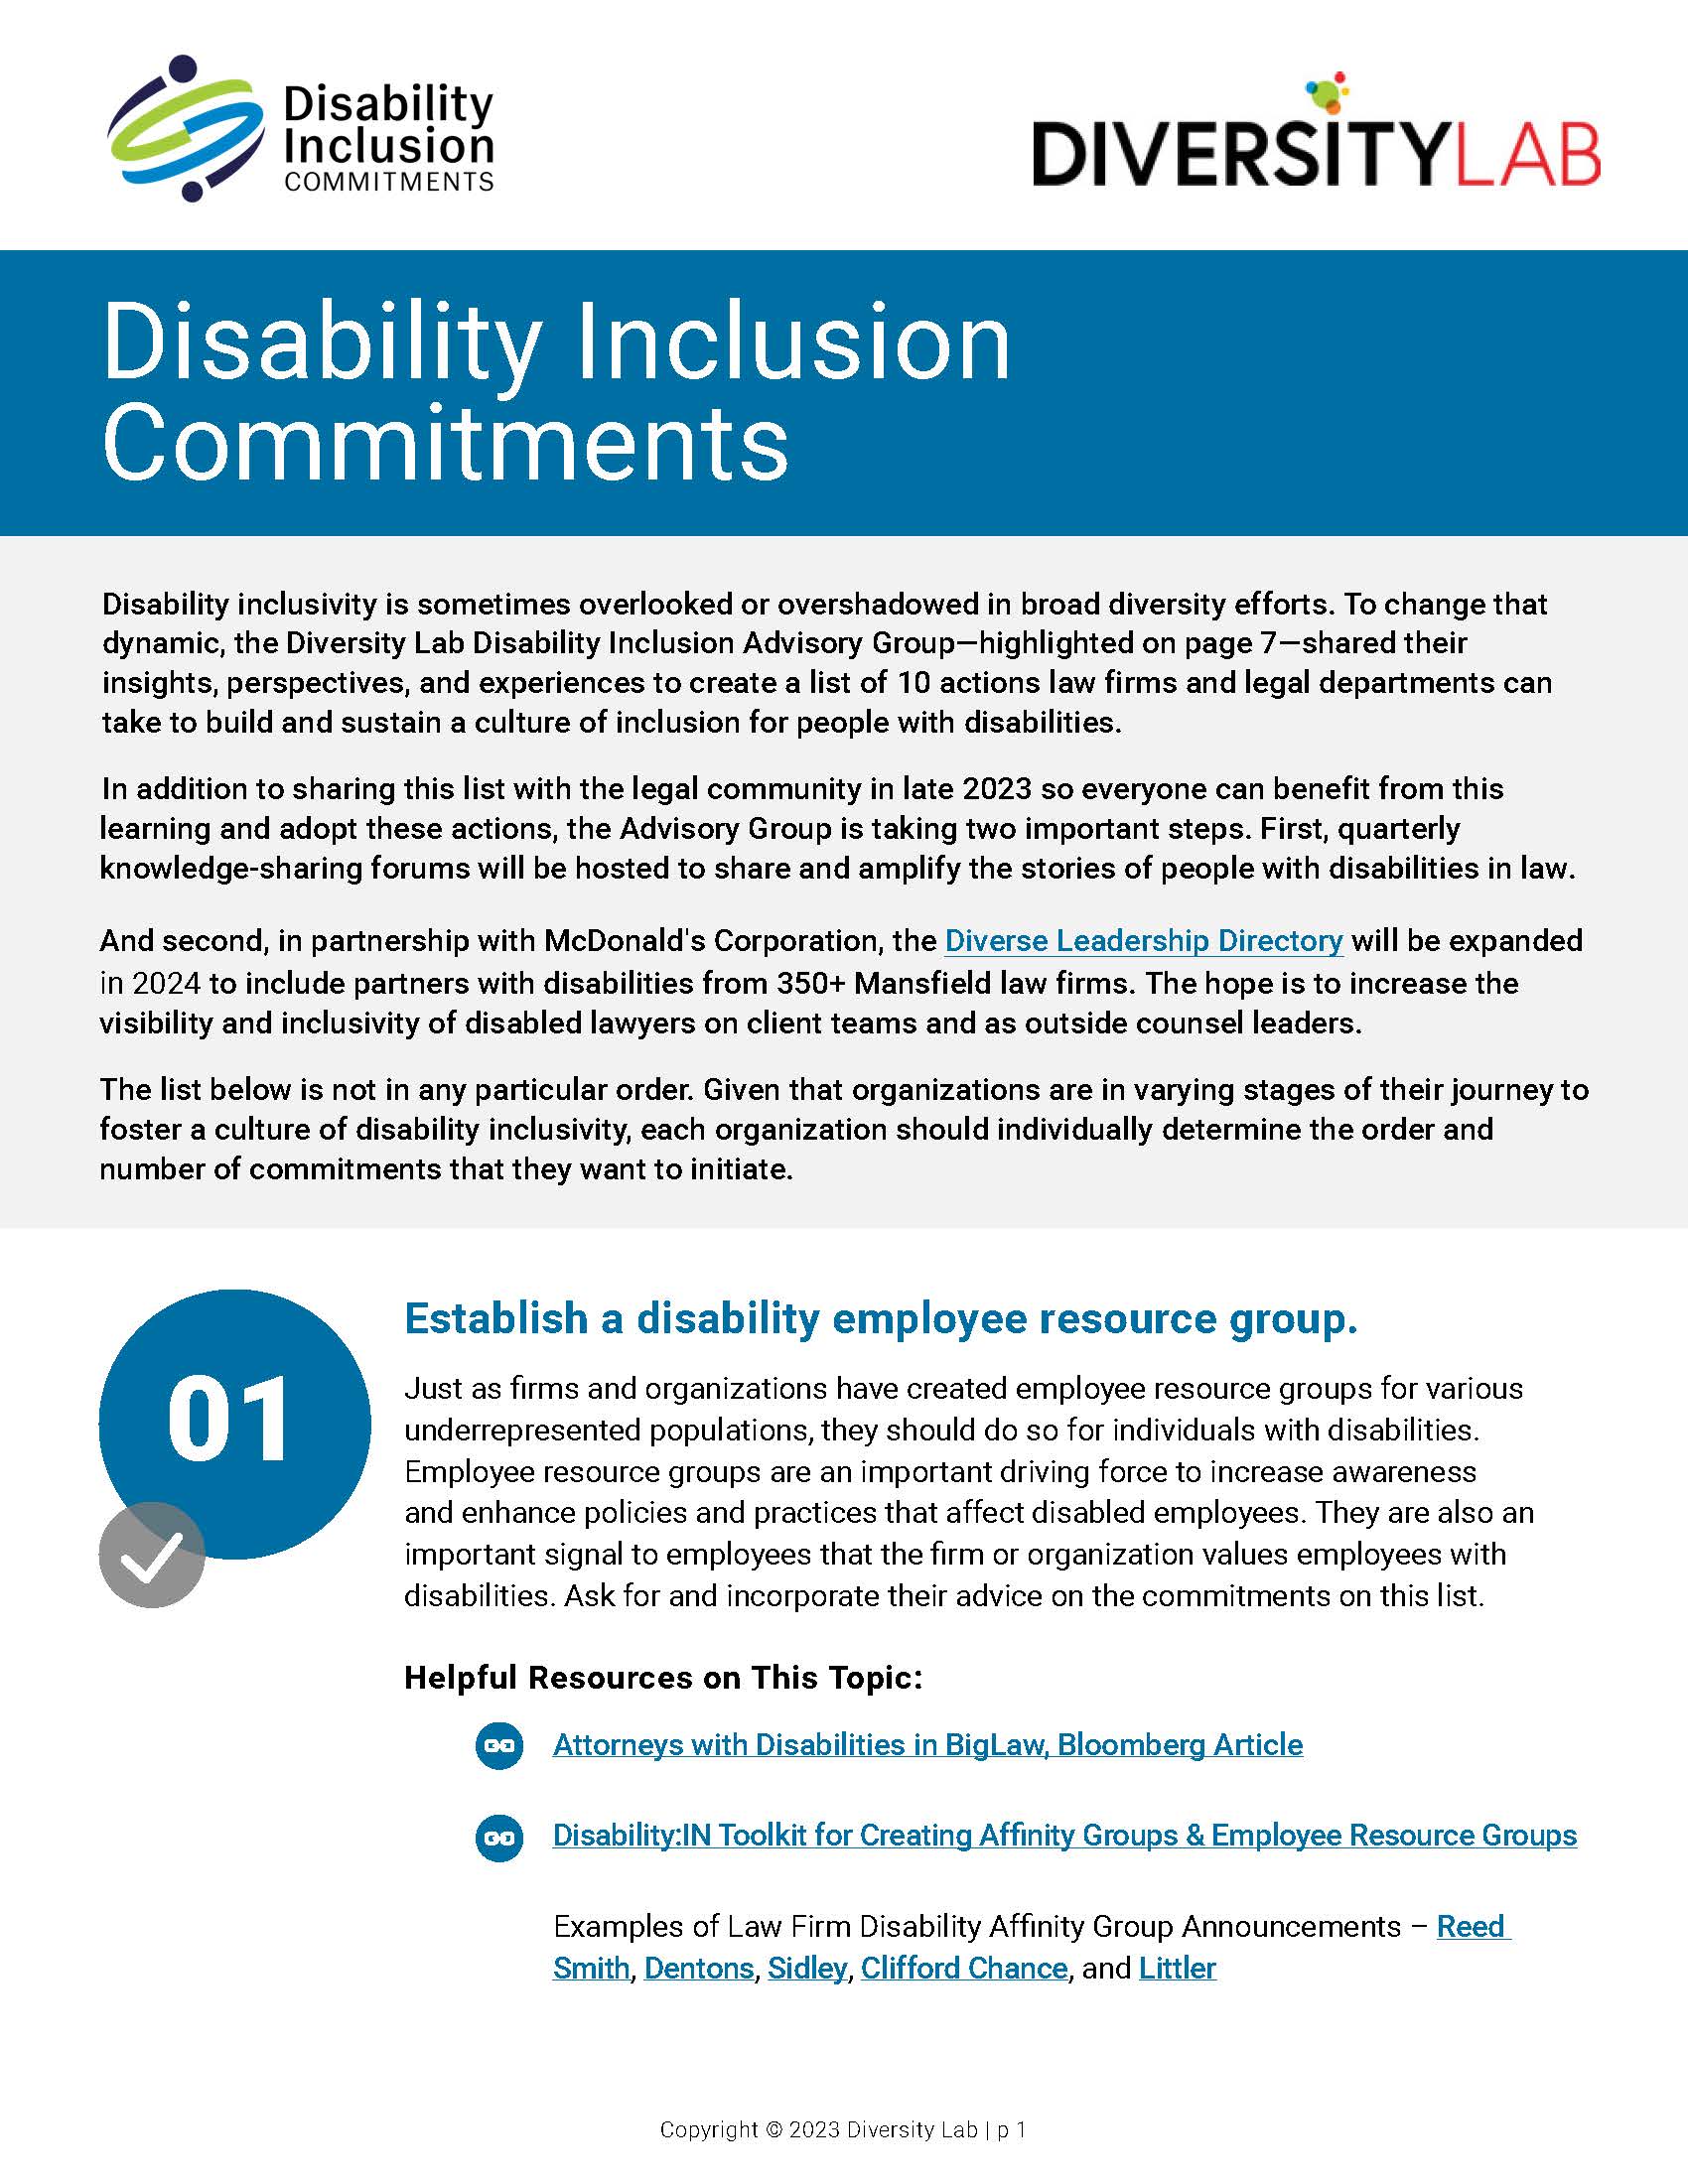 Disability Inclusion Commitments PDF Image